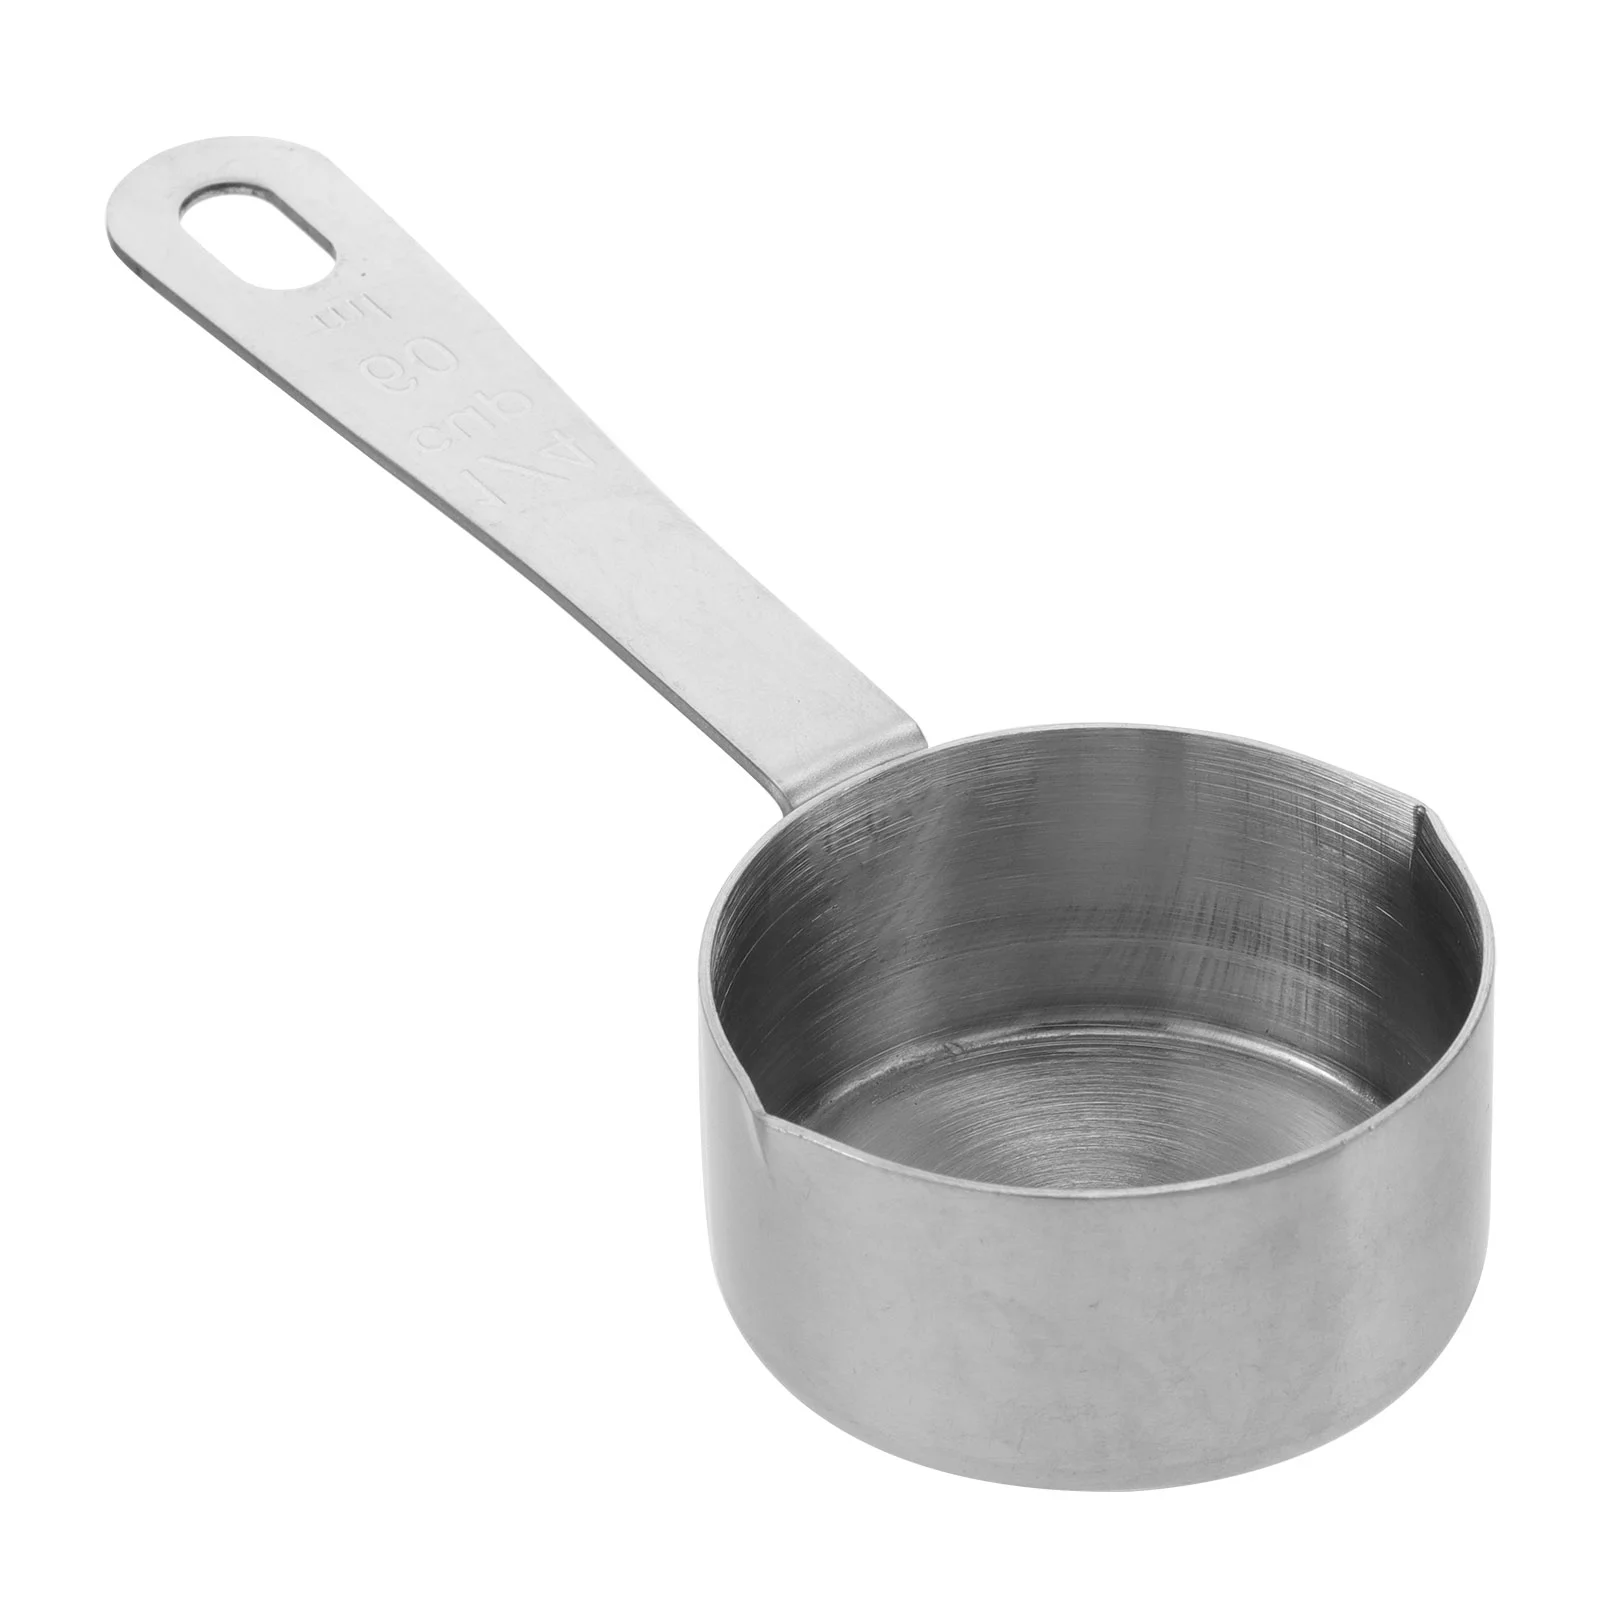 

Pot Soup Pan Saucepan Stainless Bowl Steel Onion Milk Cooking Measuring Frenchoven Bowls Cups Stew Instant Noodle Stock